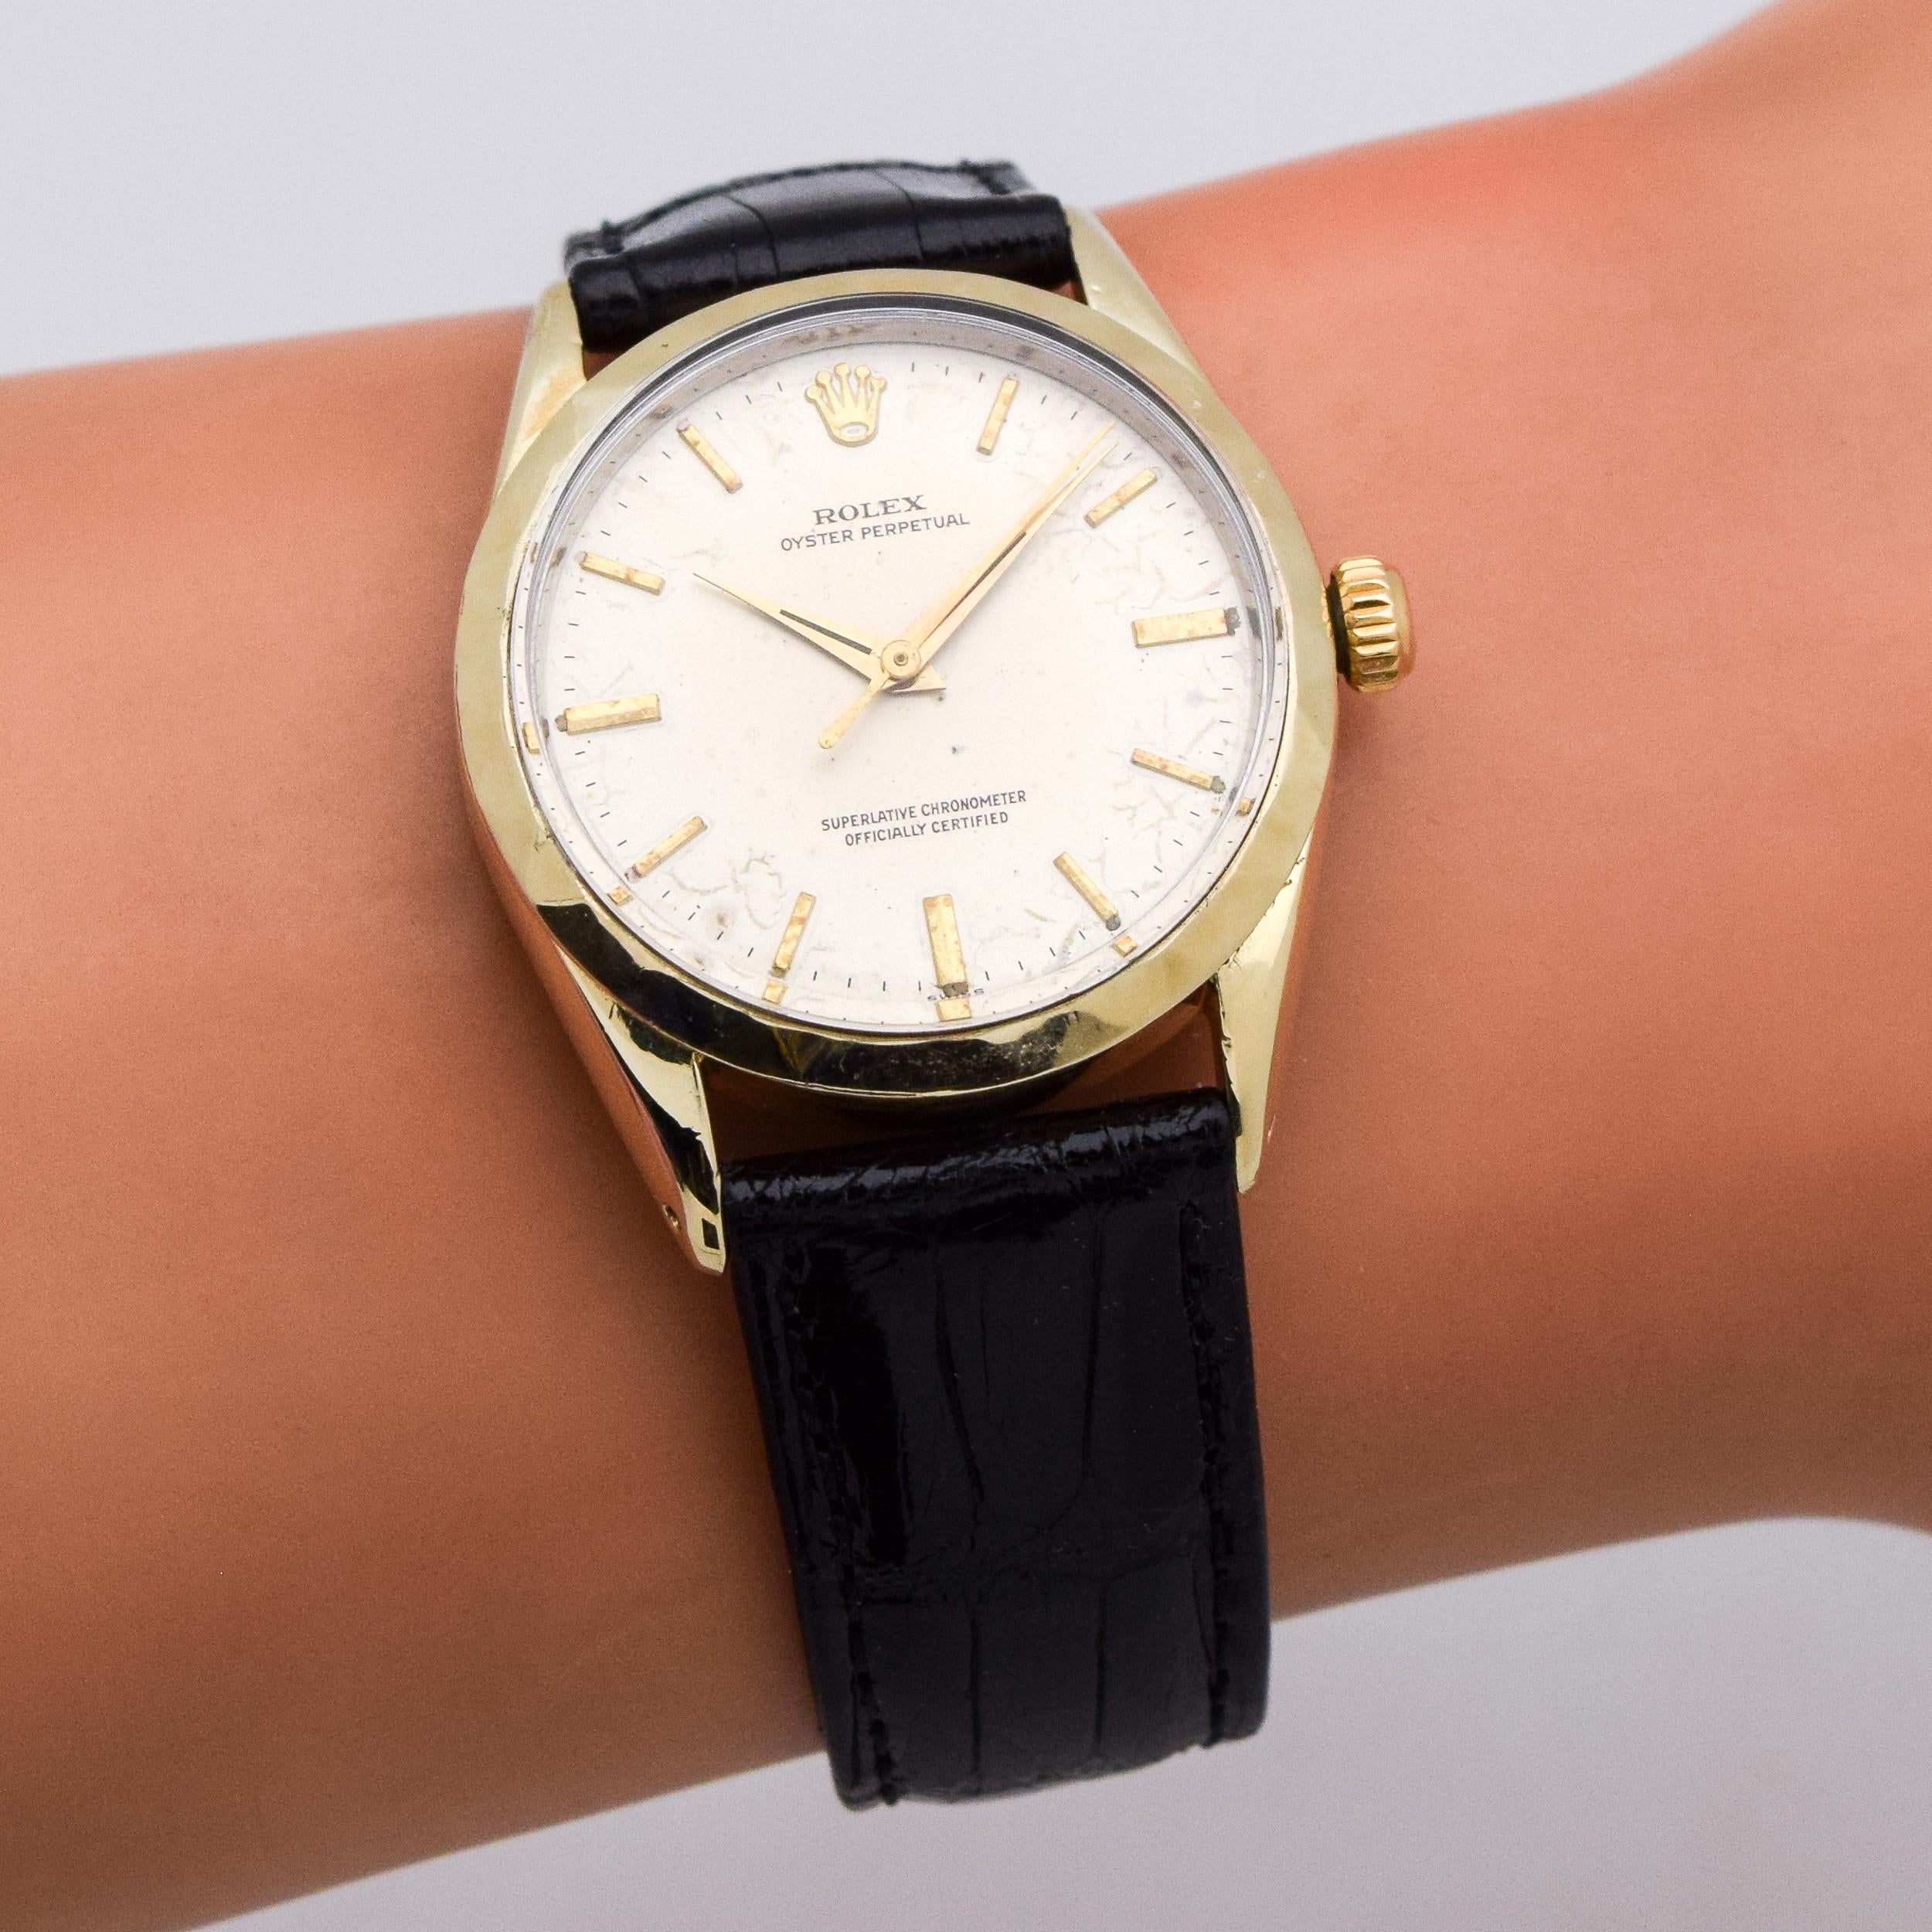 Vintage Rolex Oyster Perpetual Reference 1025 Watch, 1960s 1